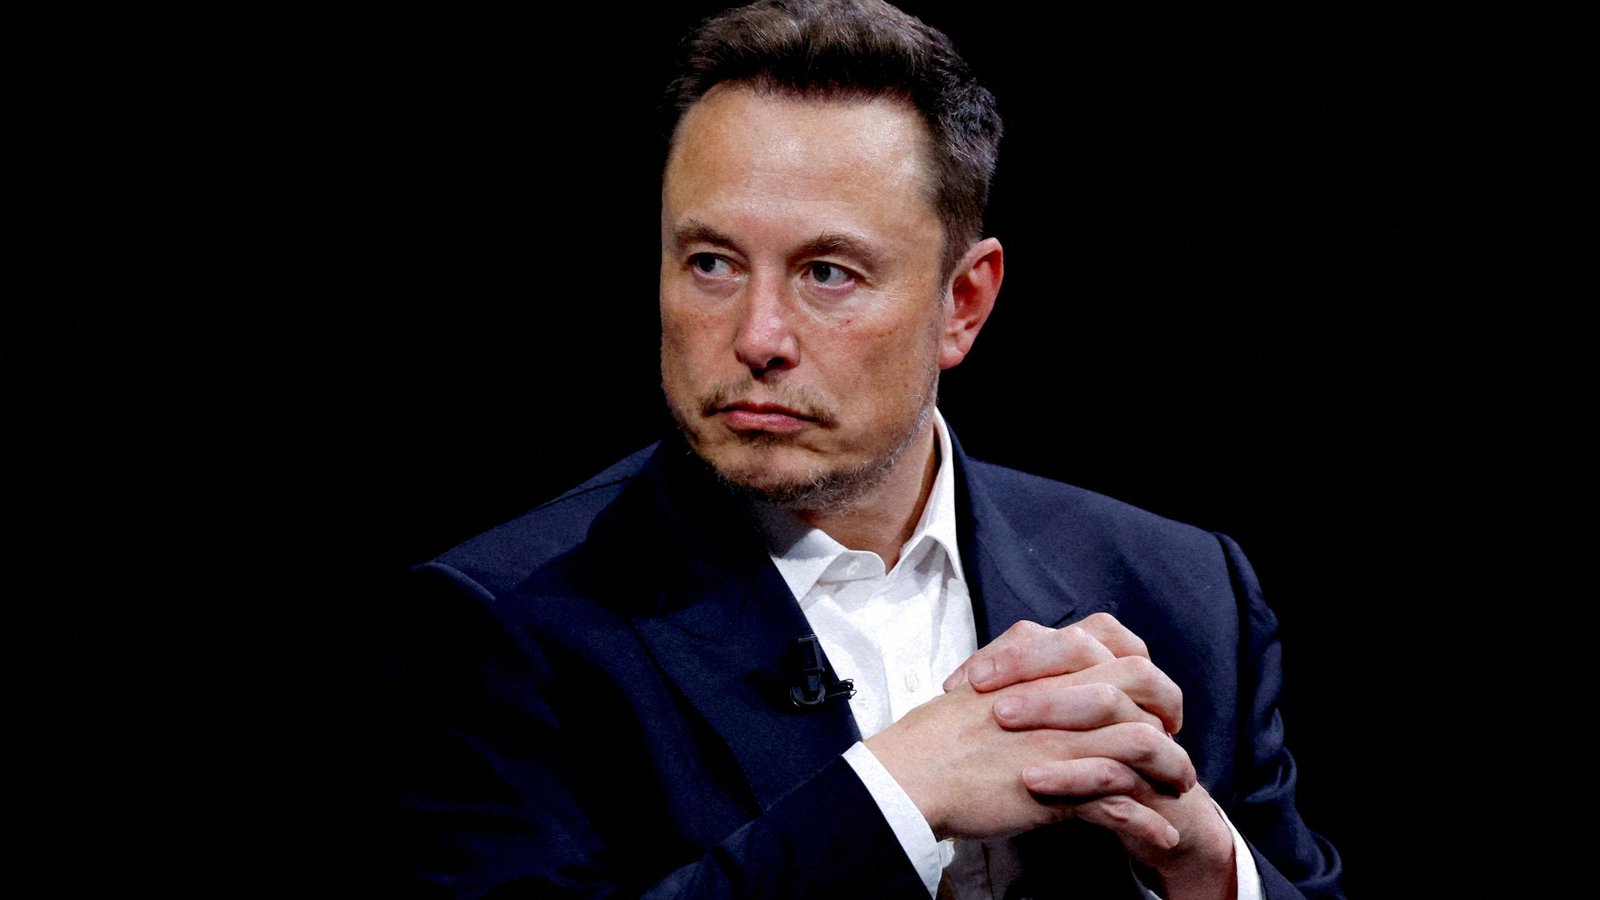 Elon Musk claims taking ketamine was beneficial for Tesla’s investors